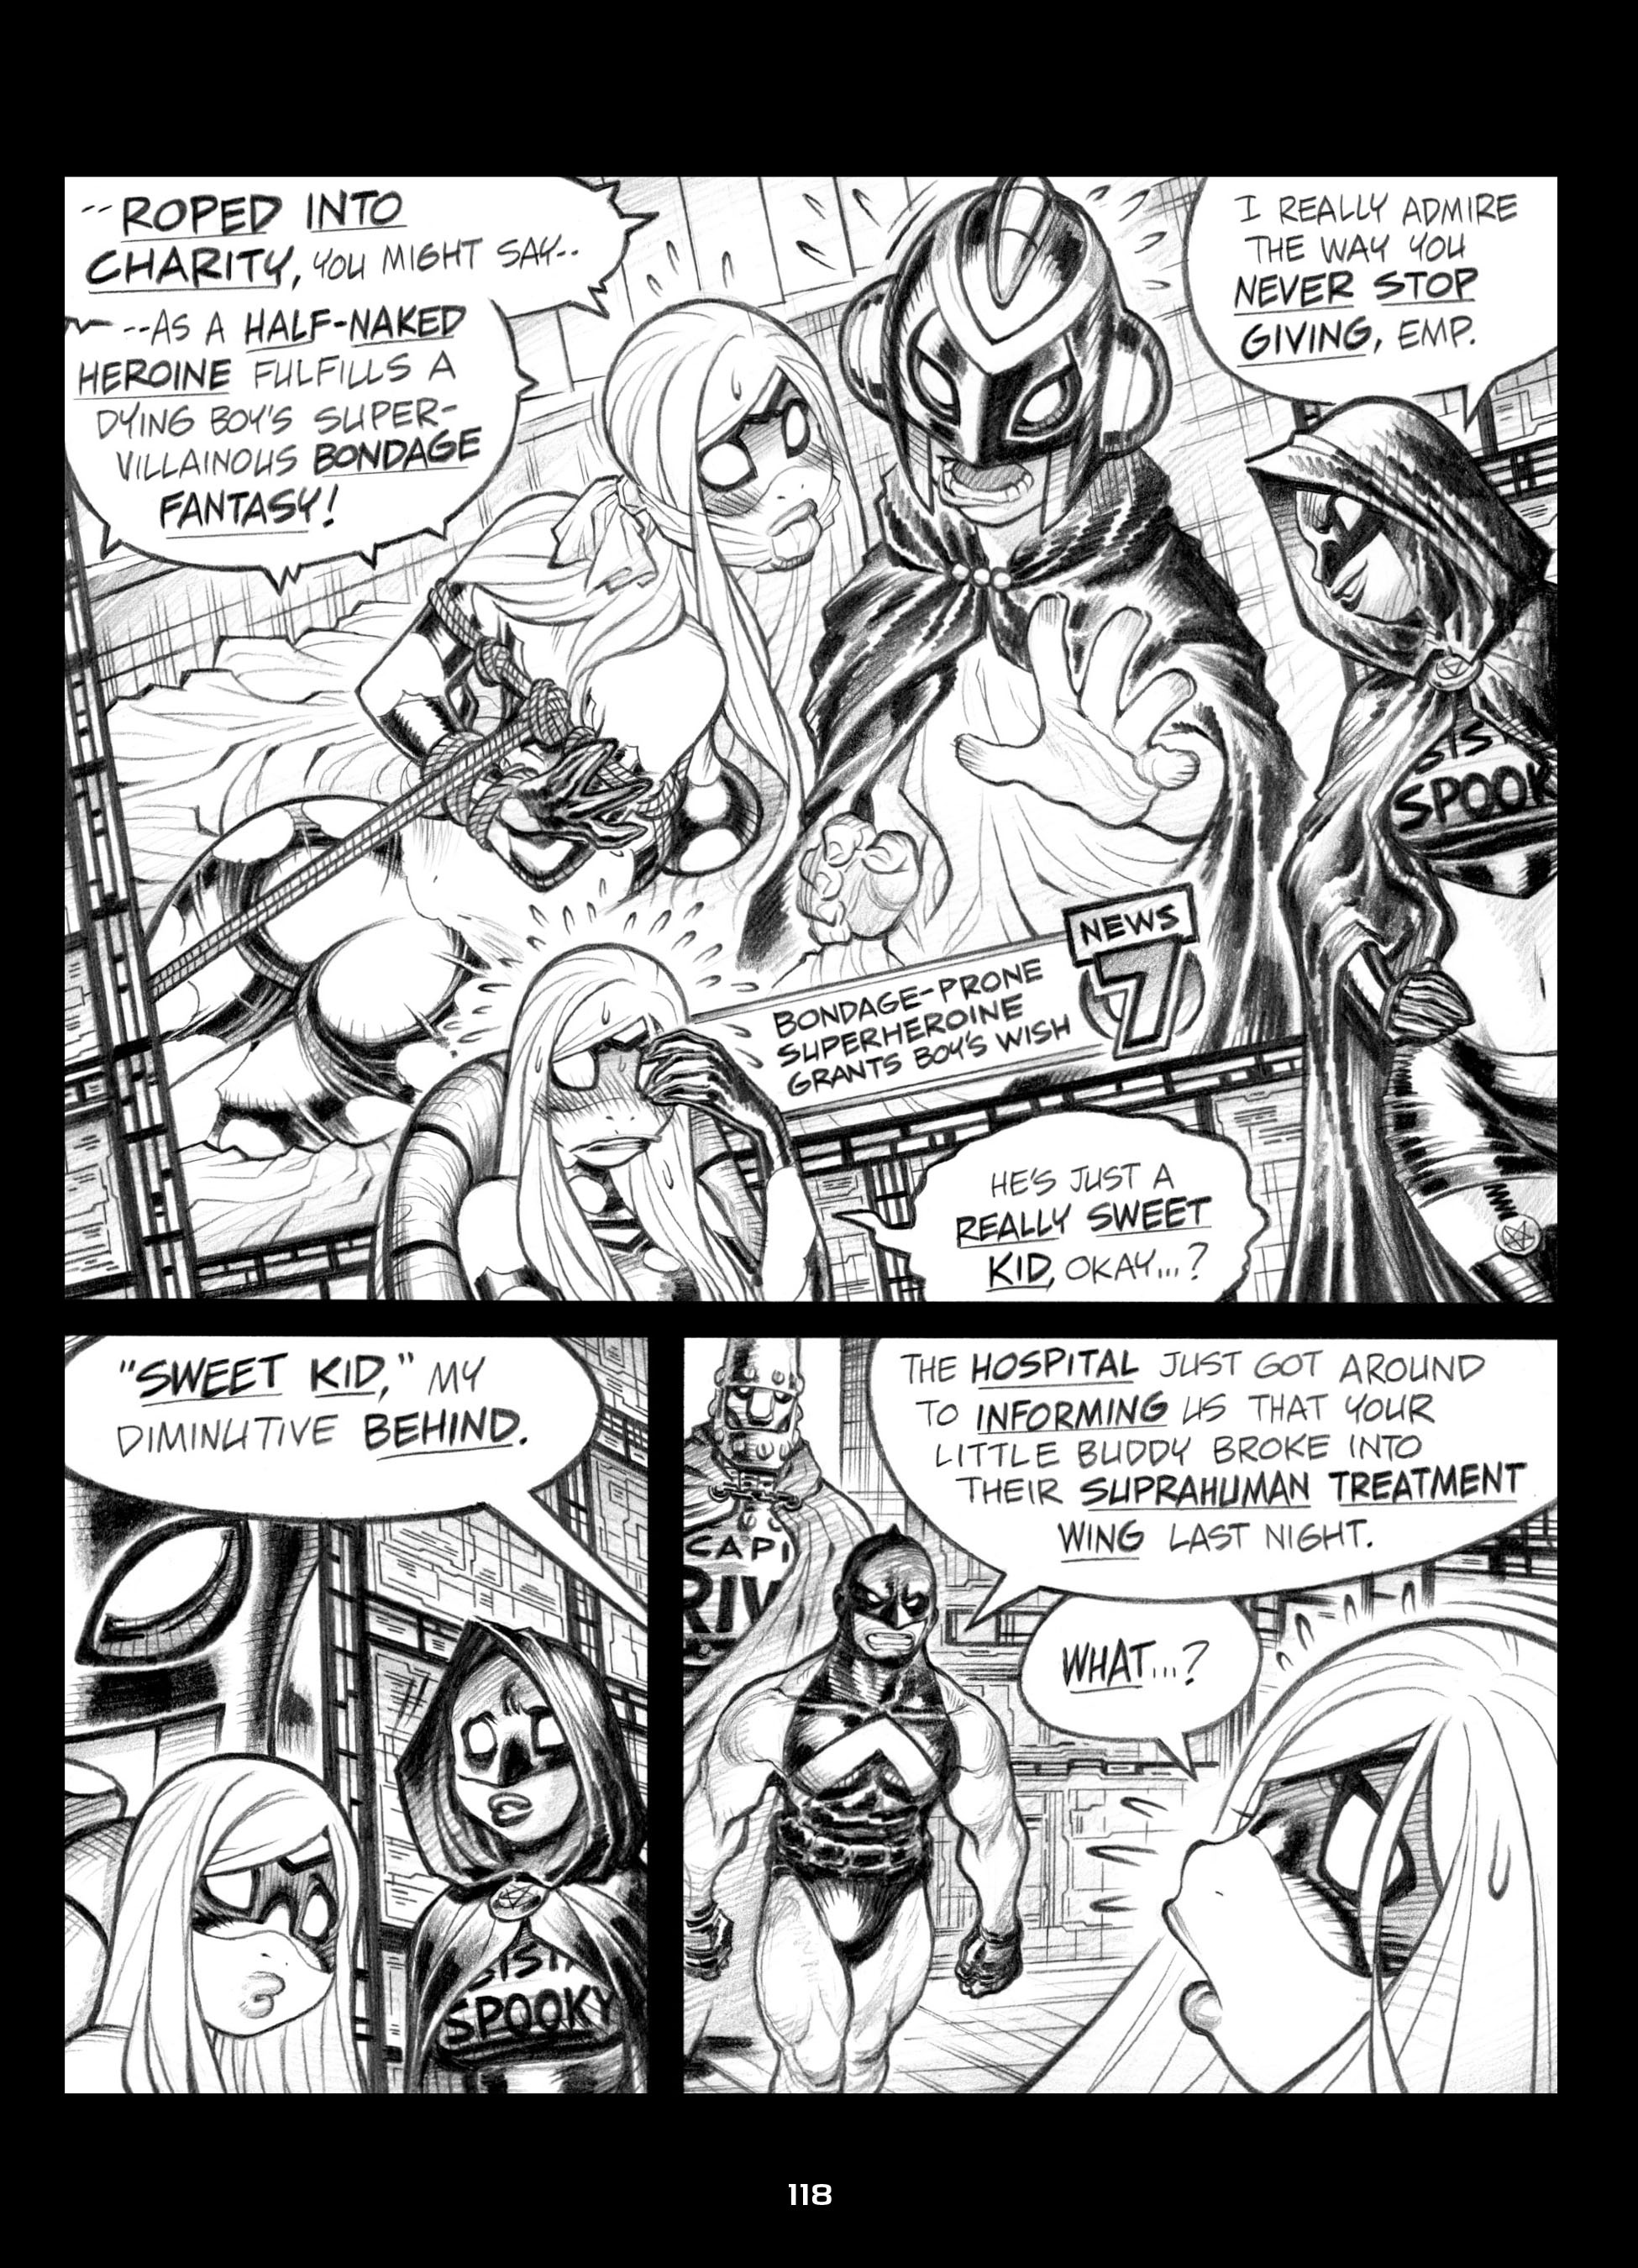 Read online Empowered comic -  Issue #4 - 118